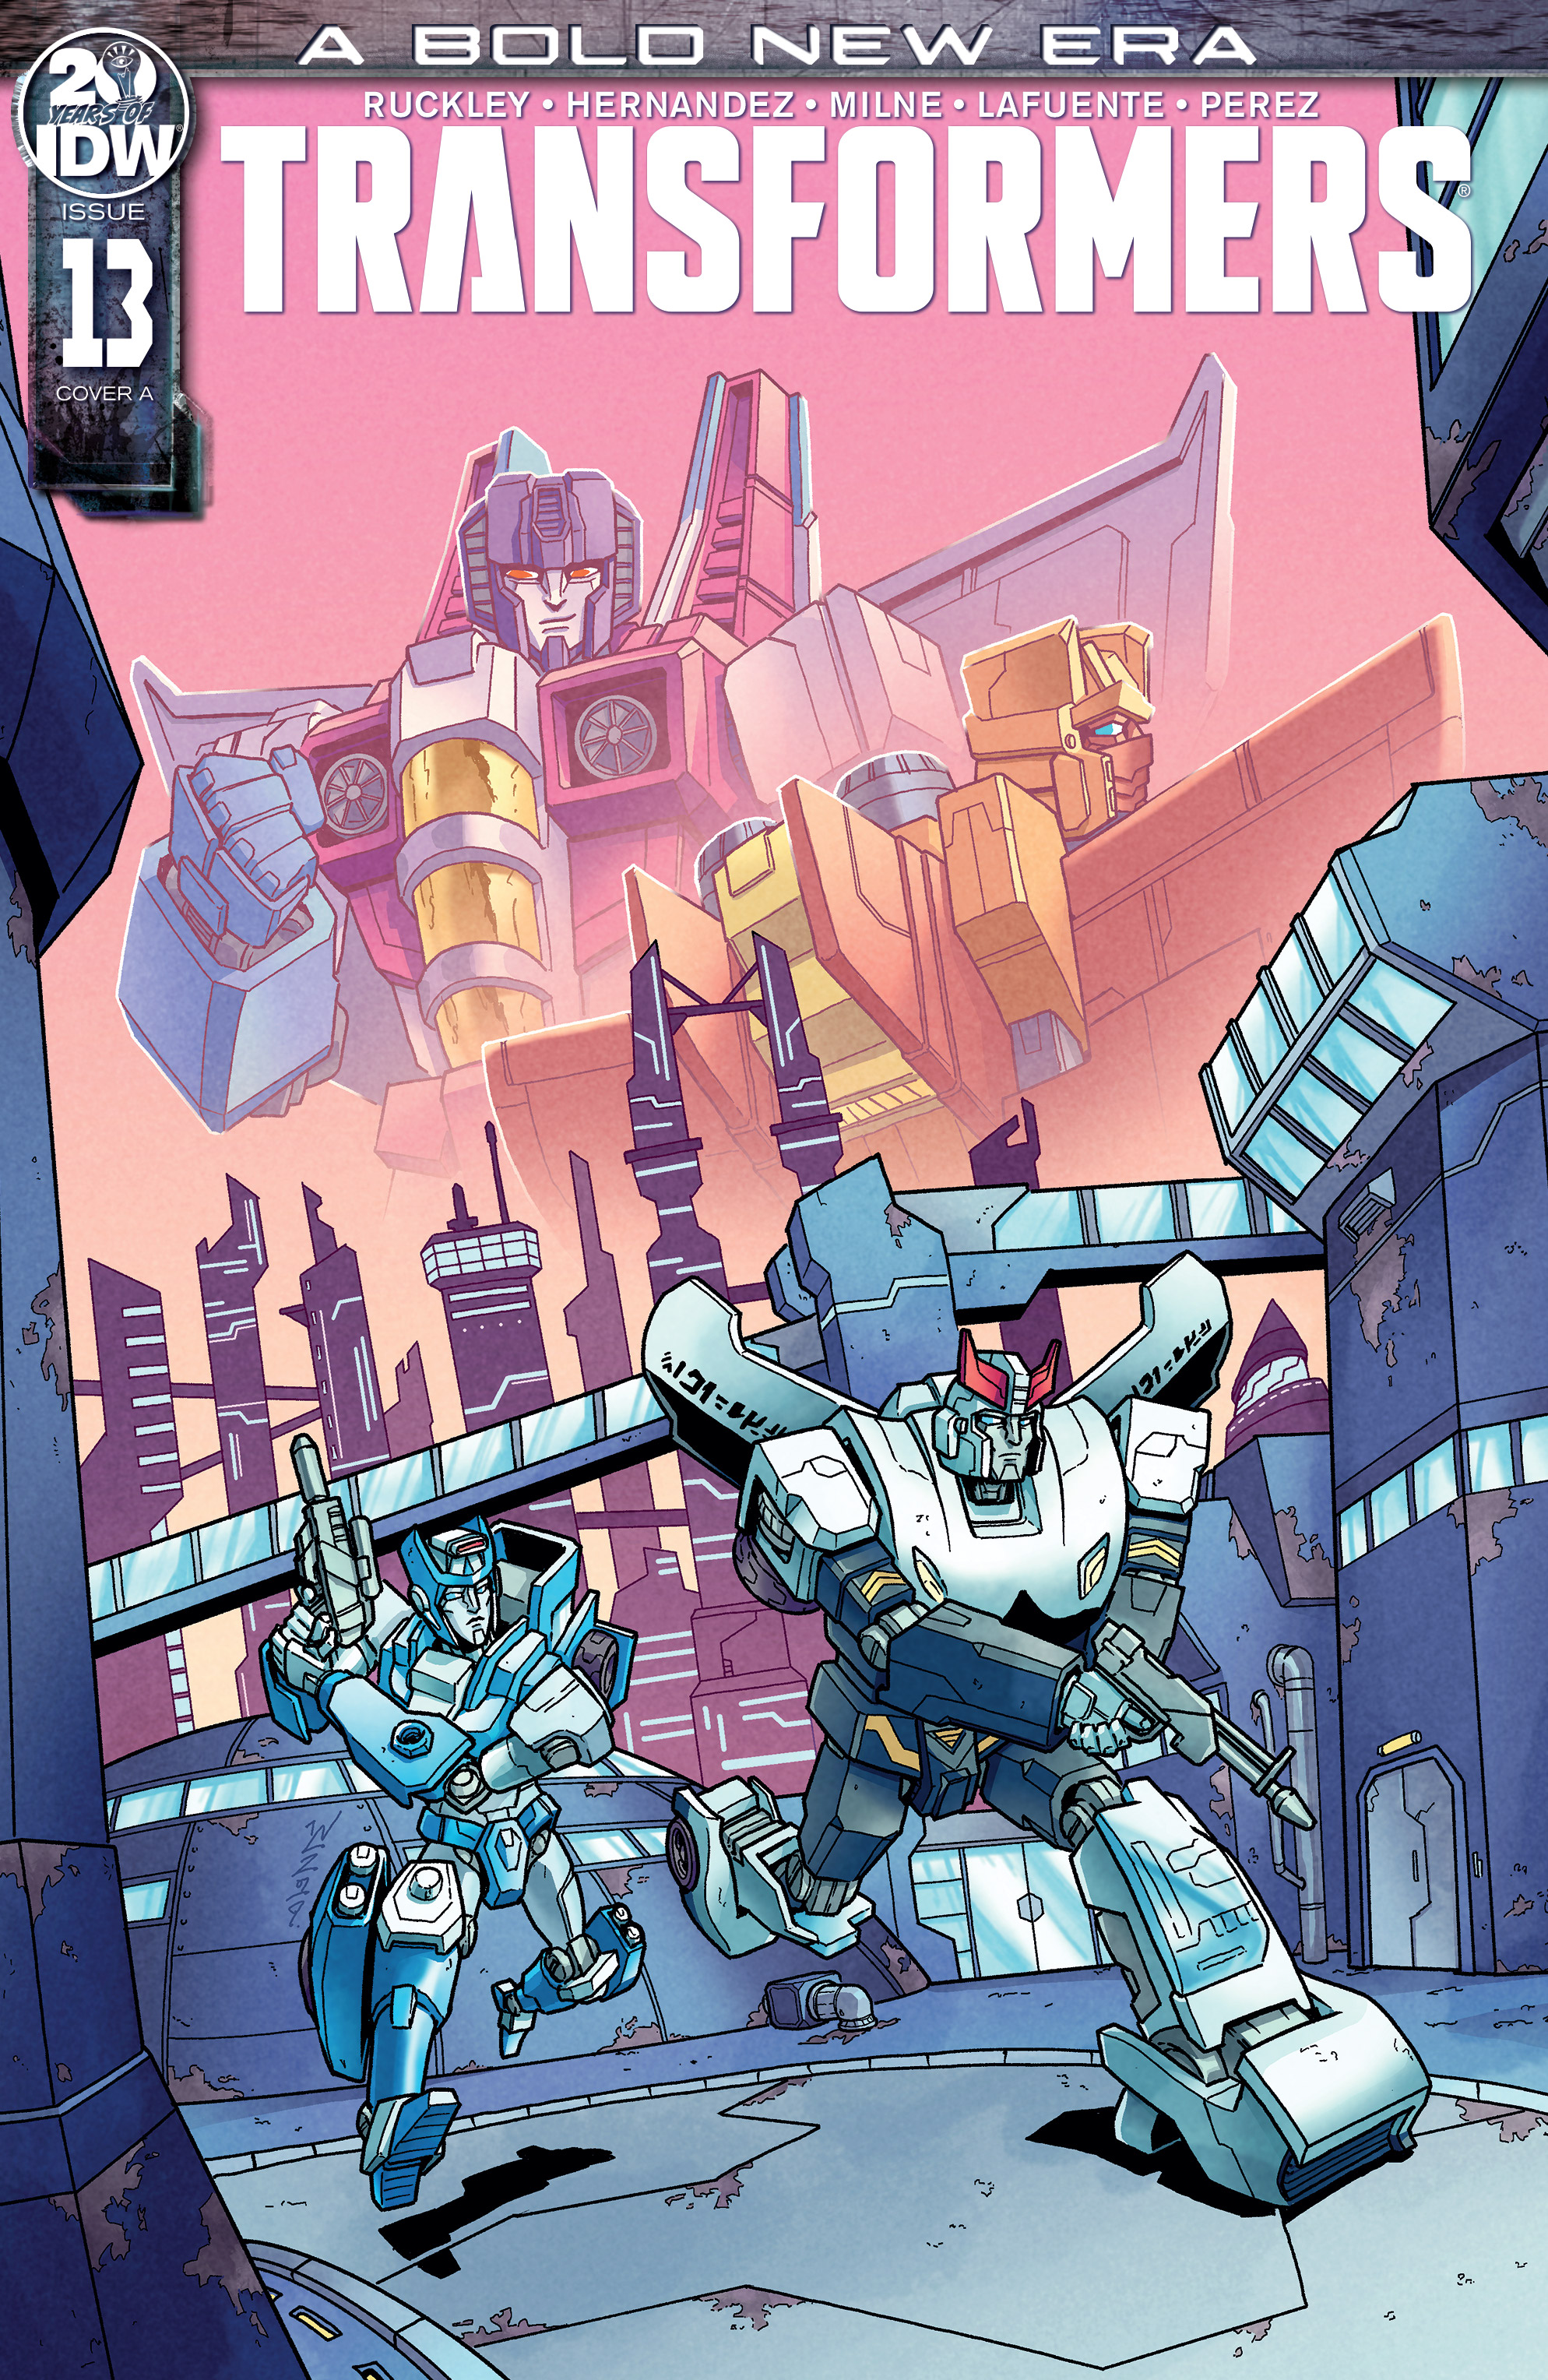 Transformers (2019-): Chapter 13 - Page 1